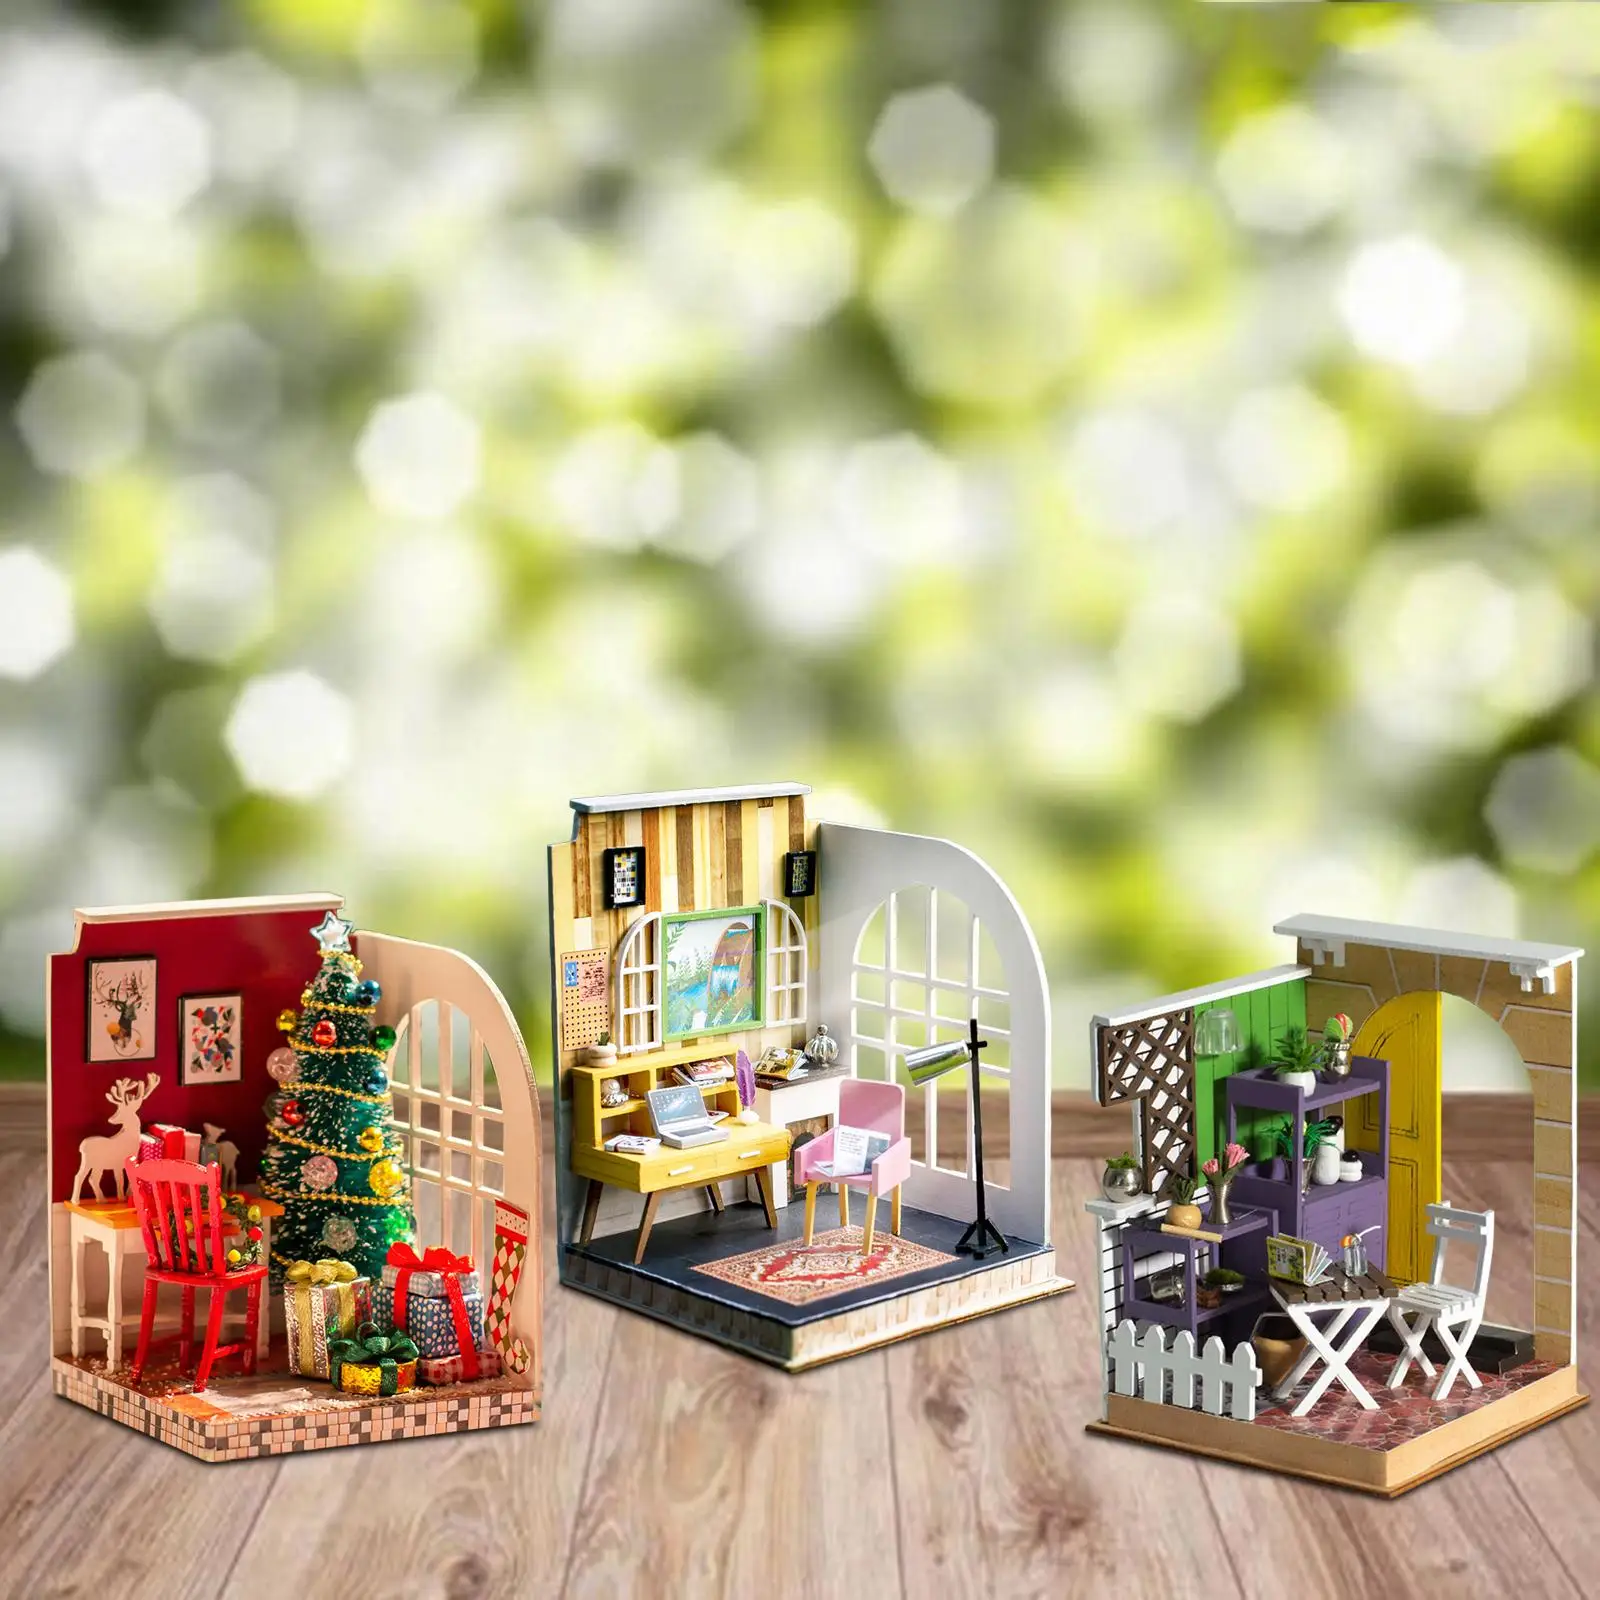 Wooden DIY Miniature Dollhouse Toy 3D Building Puzzle Home Decor for Adults Kids Girls Boys Children Birthday Gift